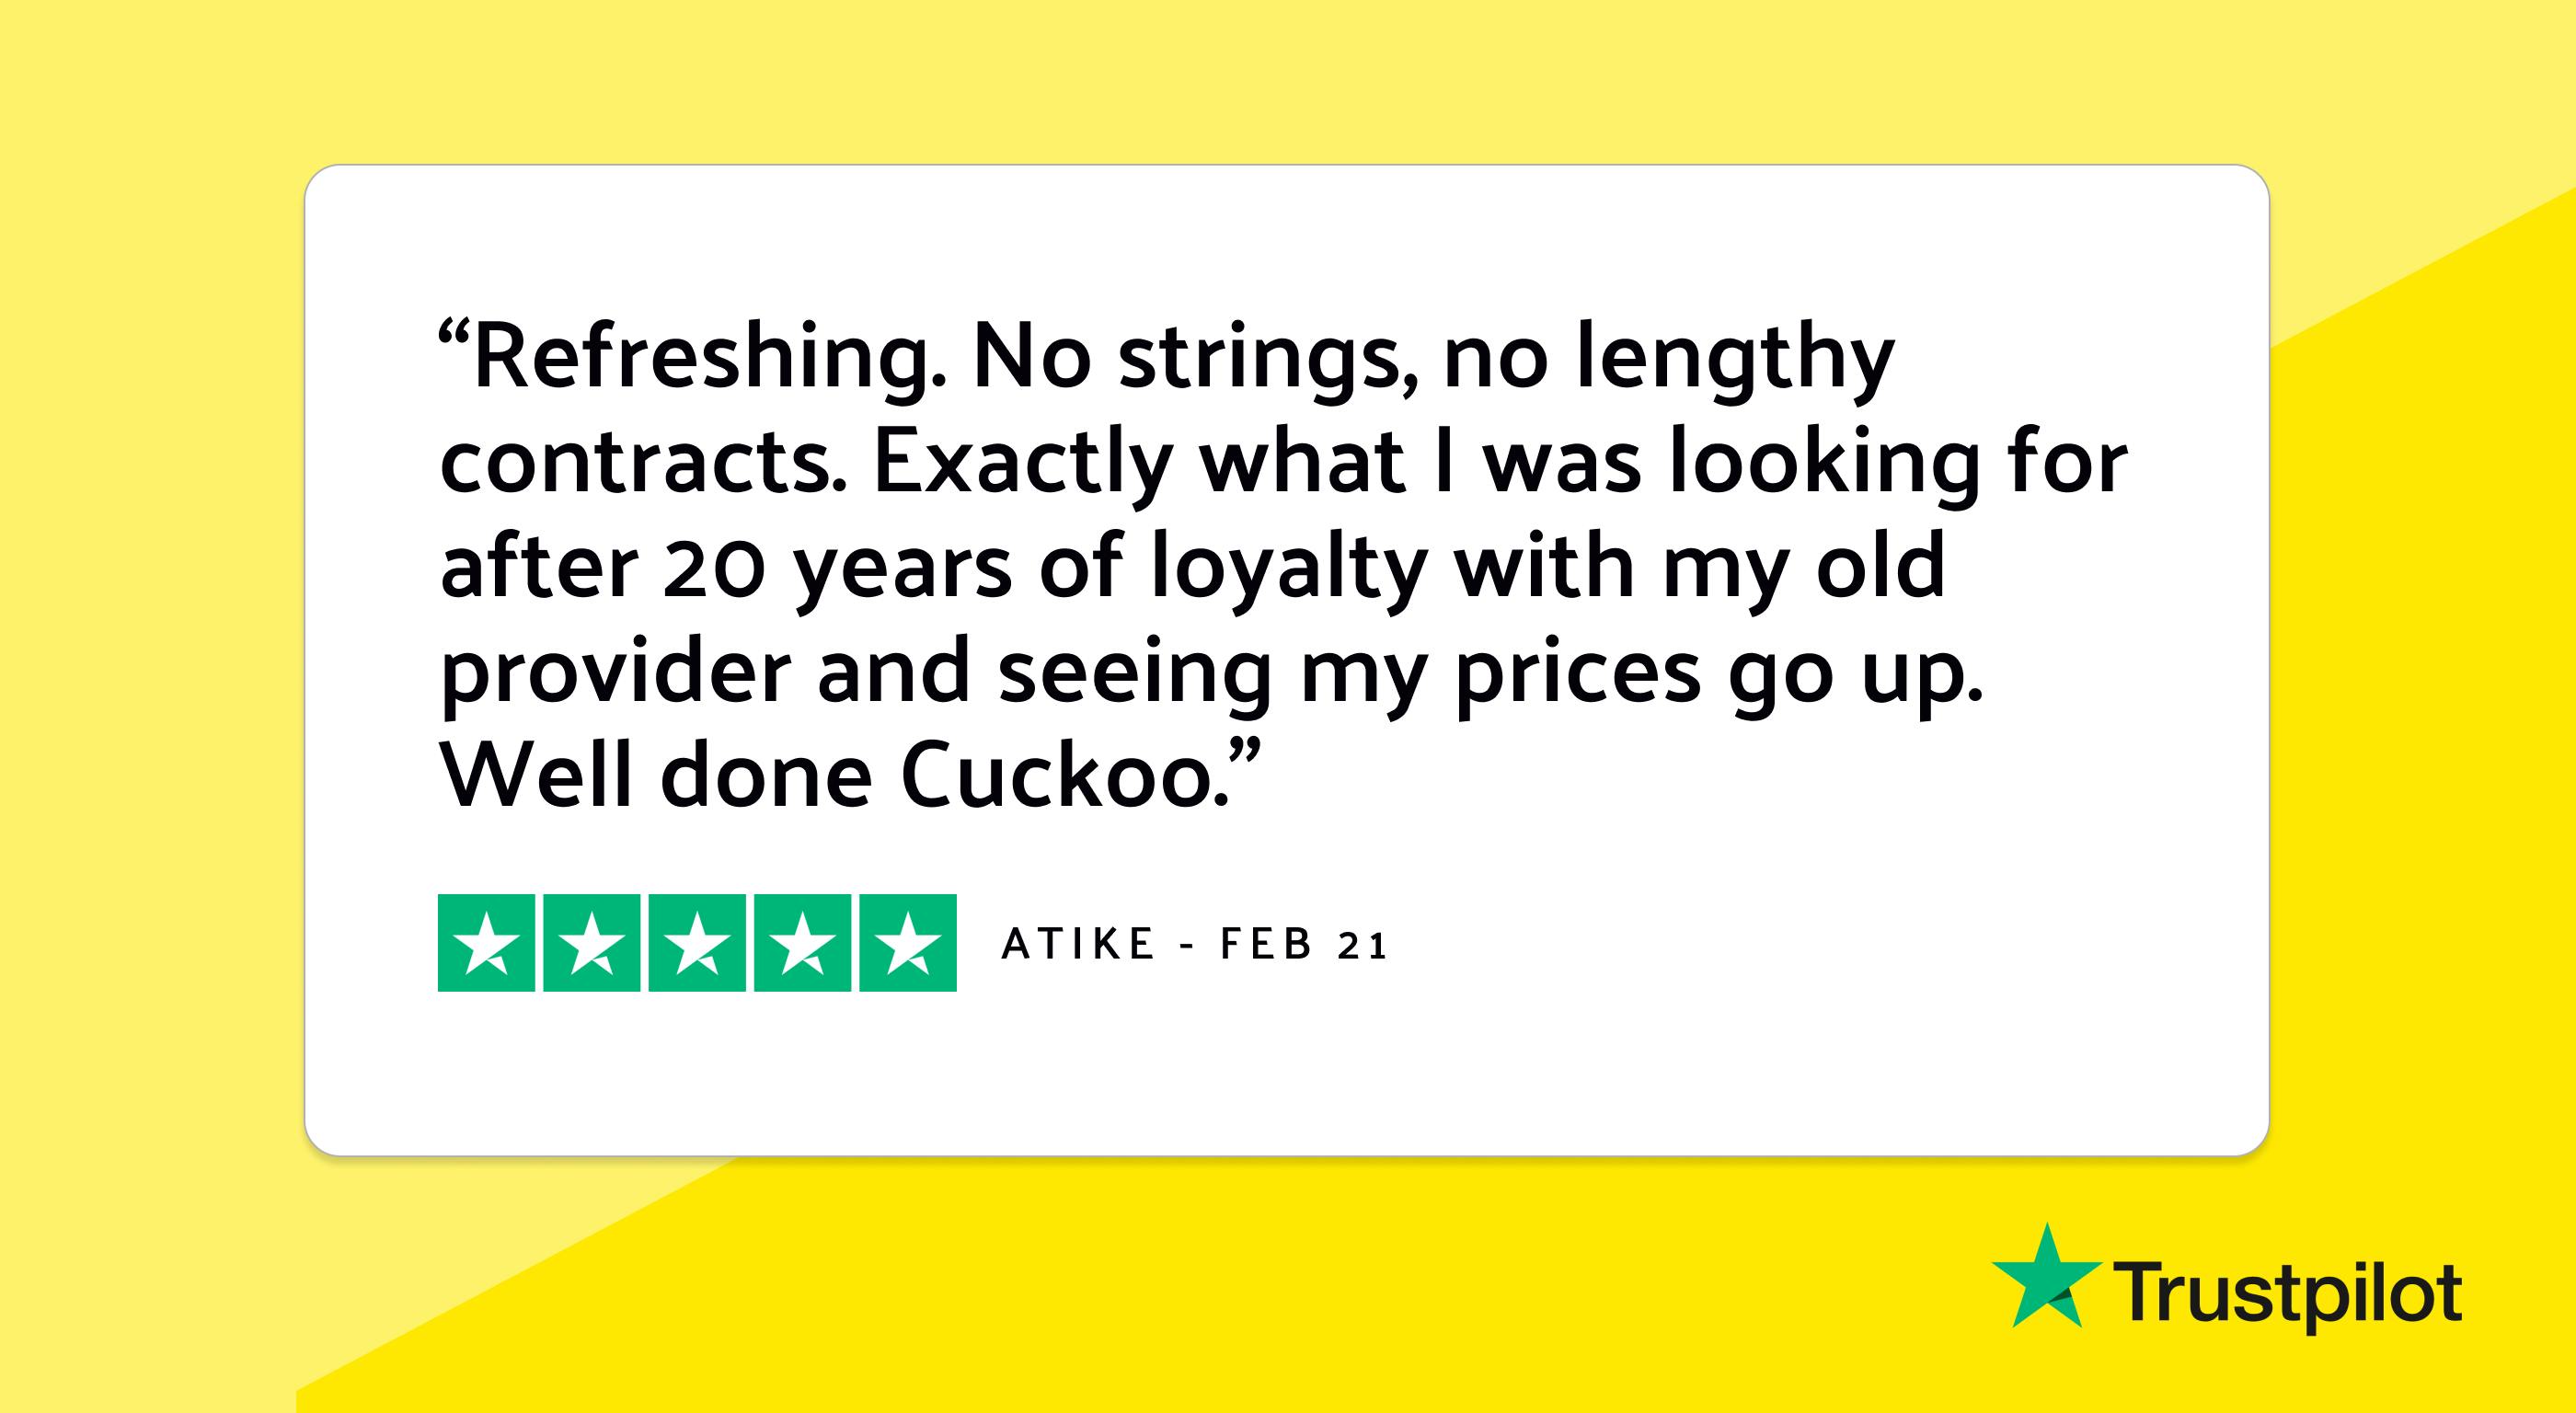 Trustpilot review: "Refreshing. No strings, no lengthy contracts. Exactly what I was looking for after 20 years of loyalty with my old provider and seeing my prices go up. Well done Cuckoo."